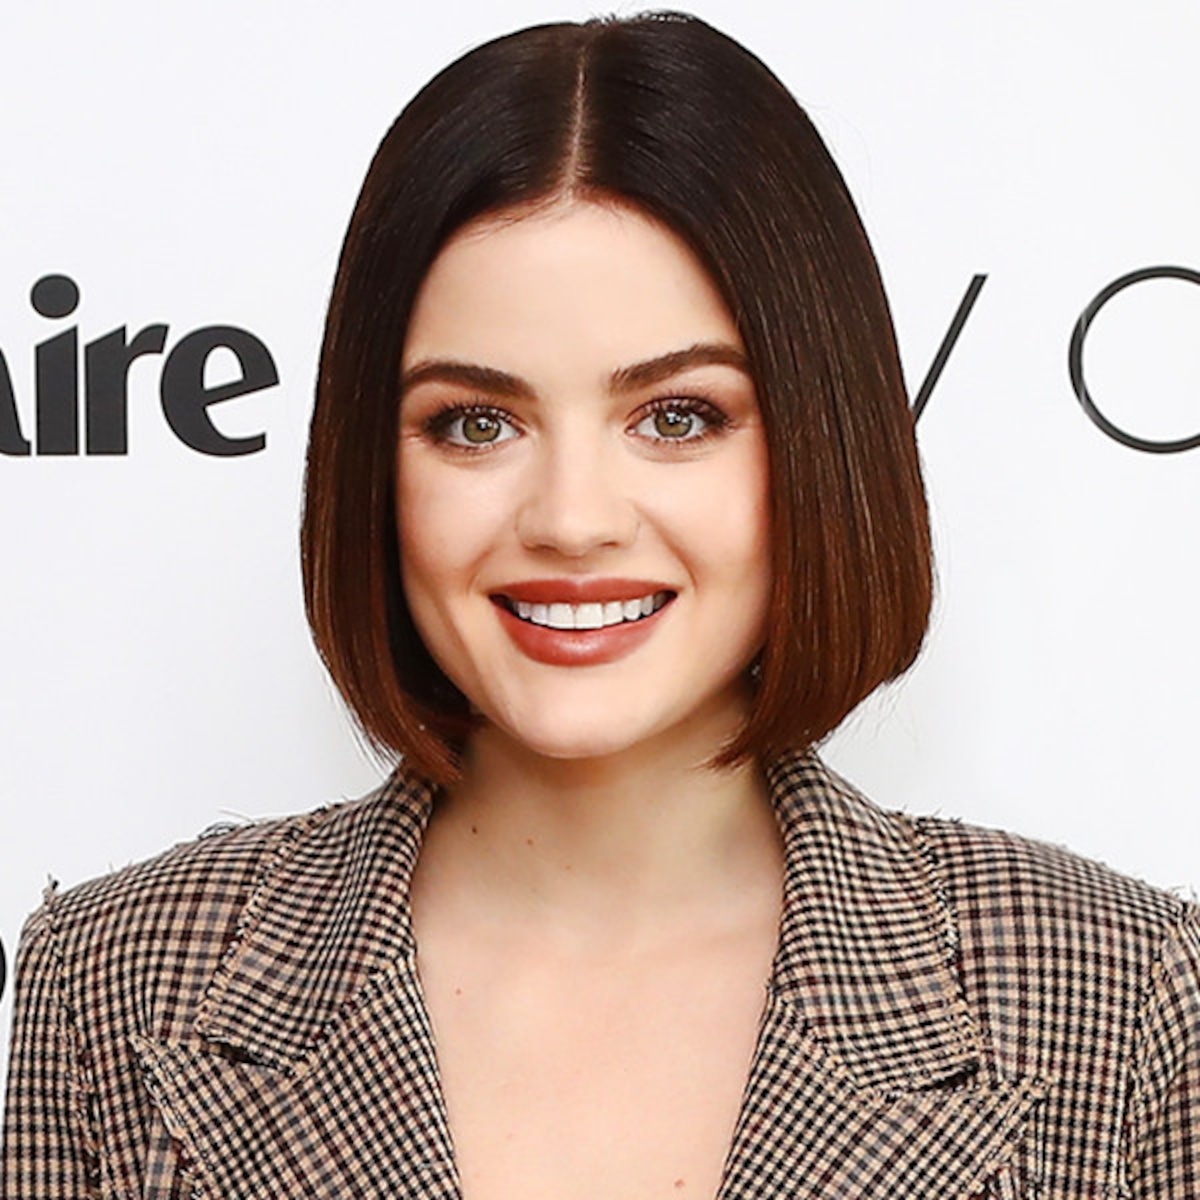 Brunette Lucy Hale Short Hair Wallpapers